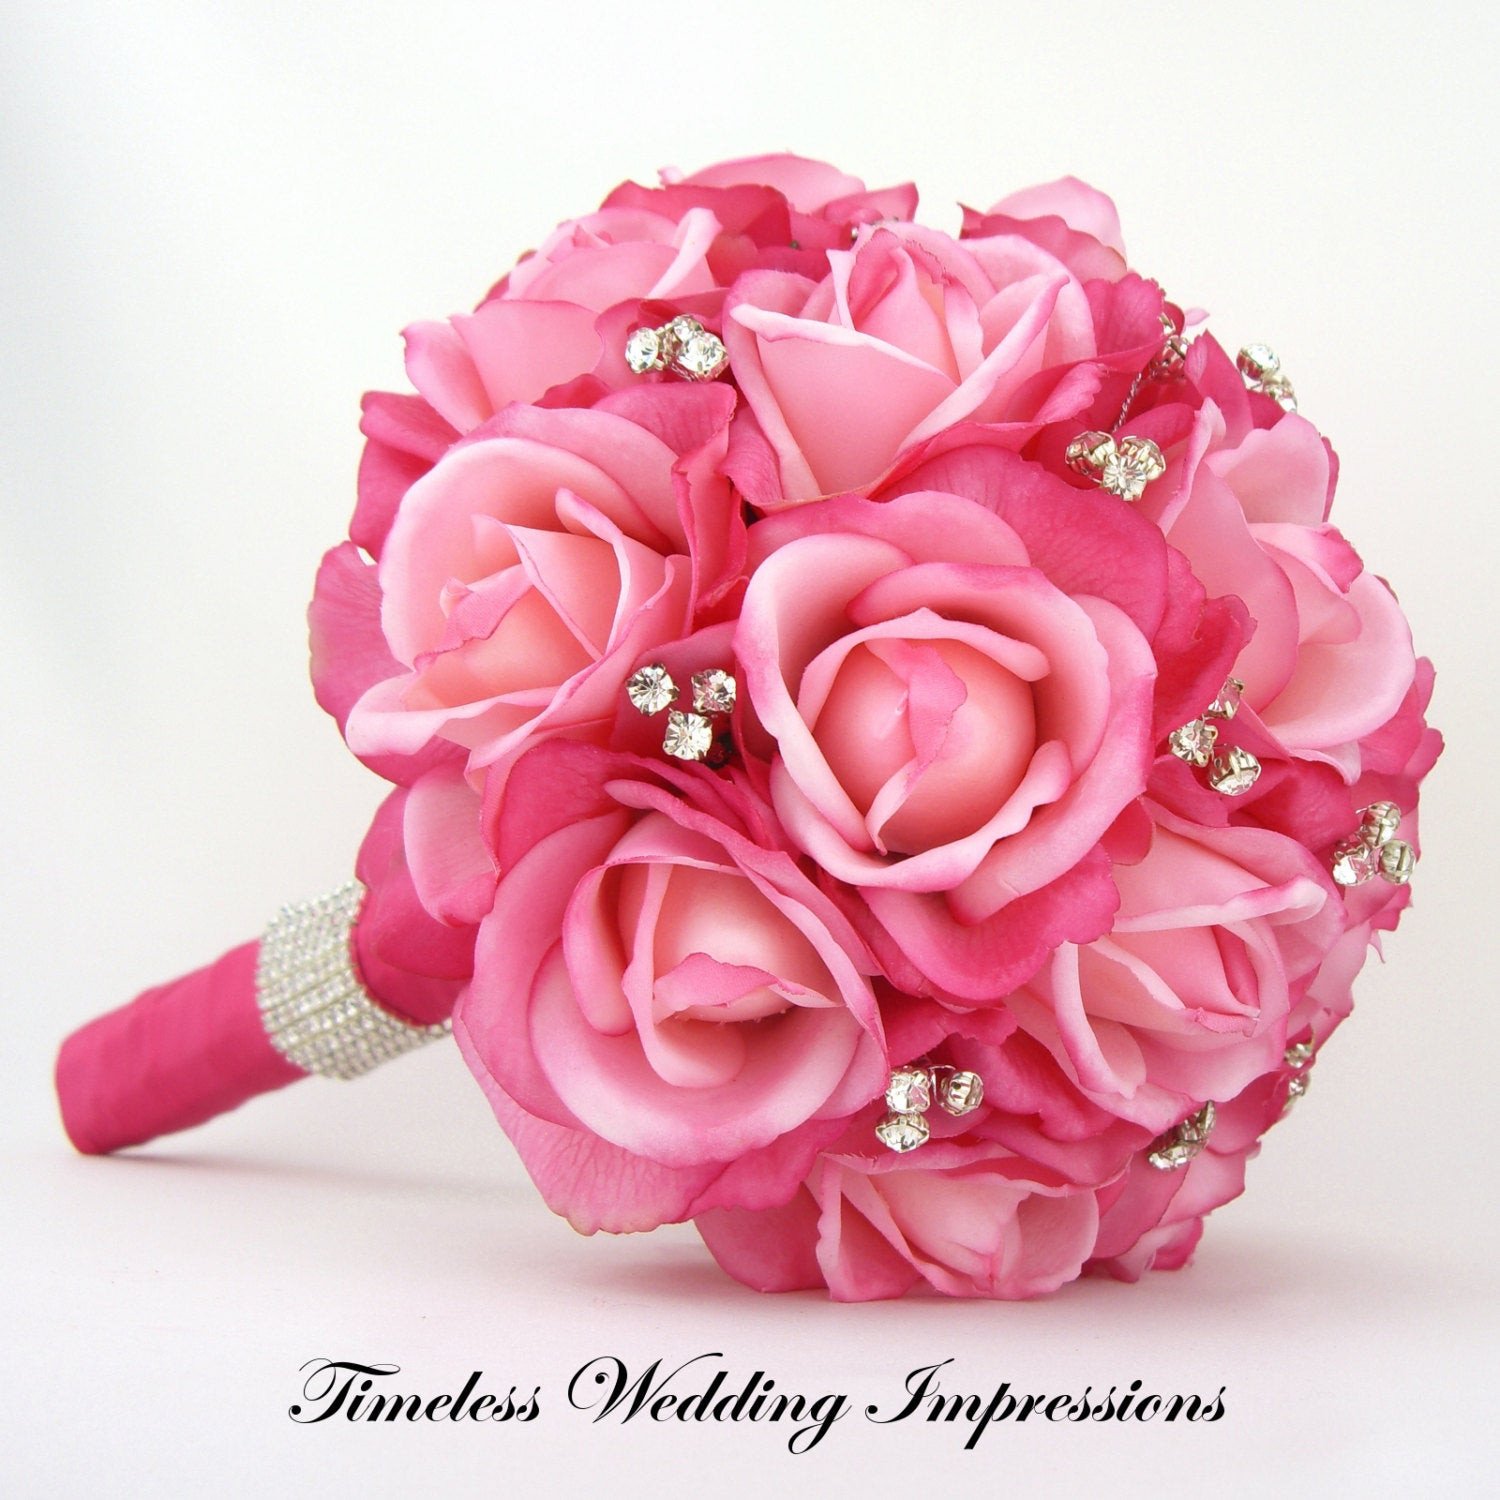 Hot Pink Wedding Flowers
 Hot Pink Bridal Bouquet Roses Bling Crystals by